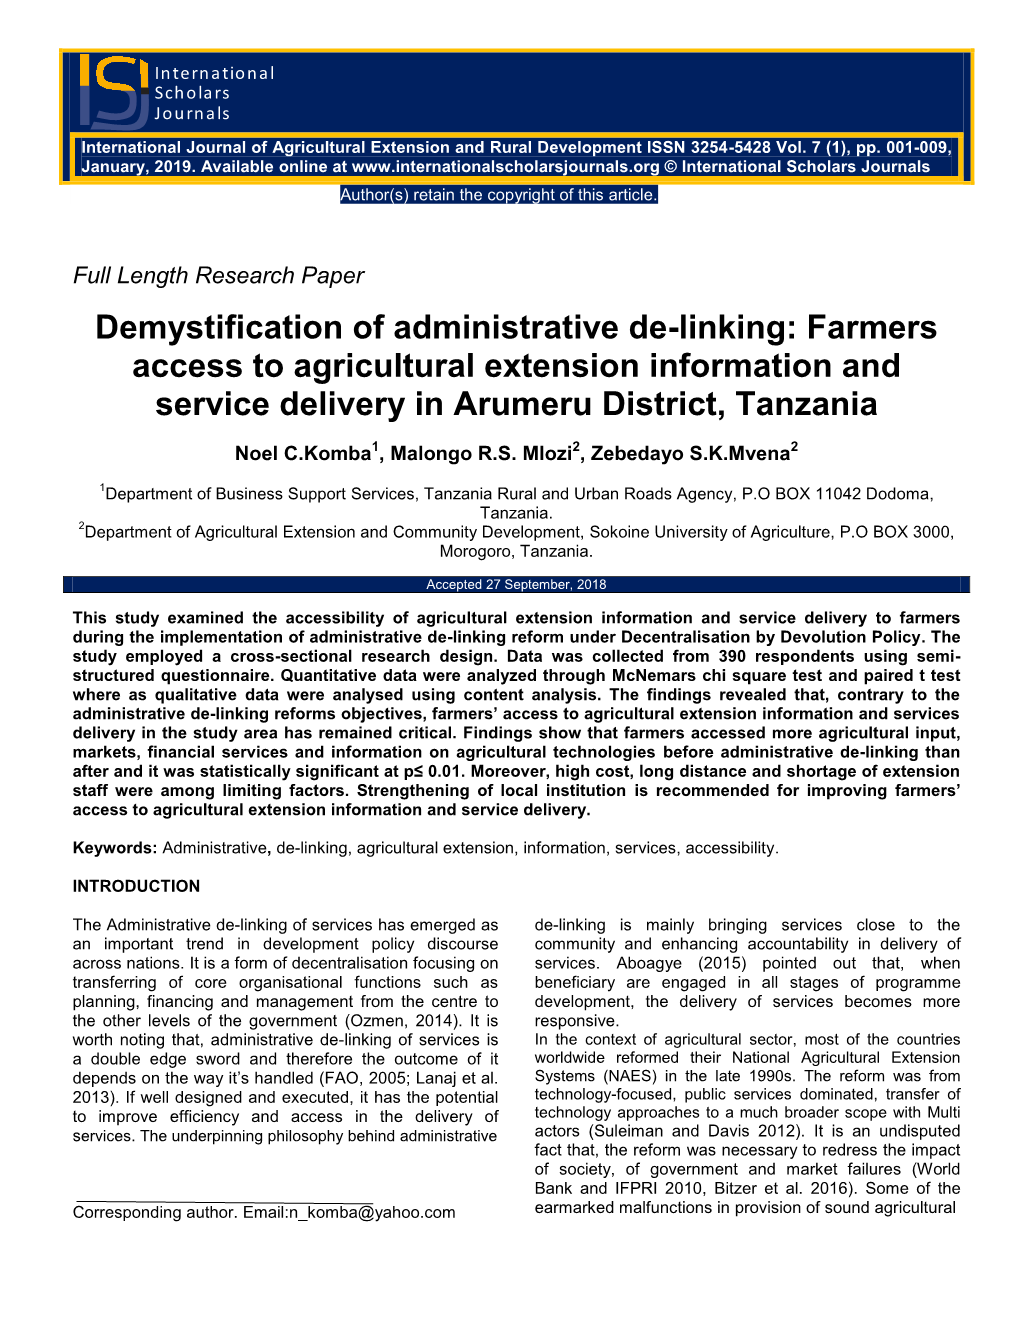 Demystification of Administrative De-Linking: Farmers Access to Agricultural Extension Information and Service Delivery in Arumeru District, Tanzania